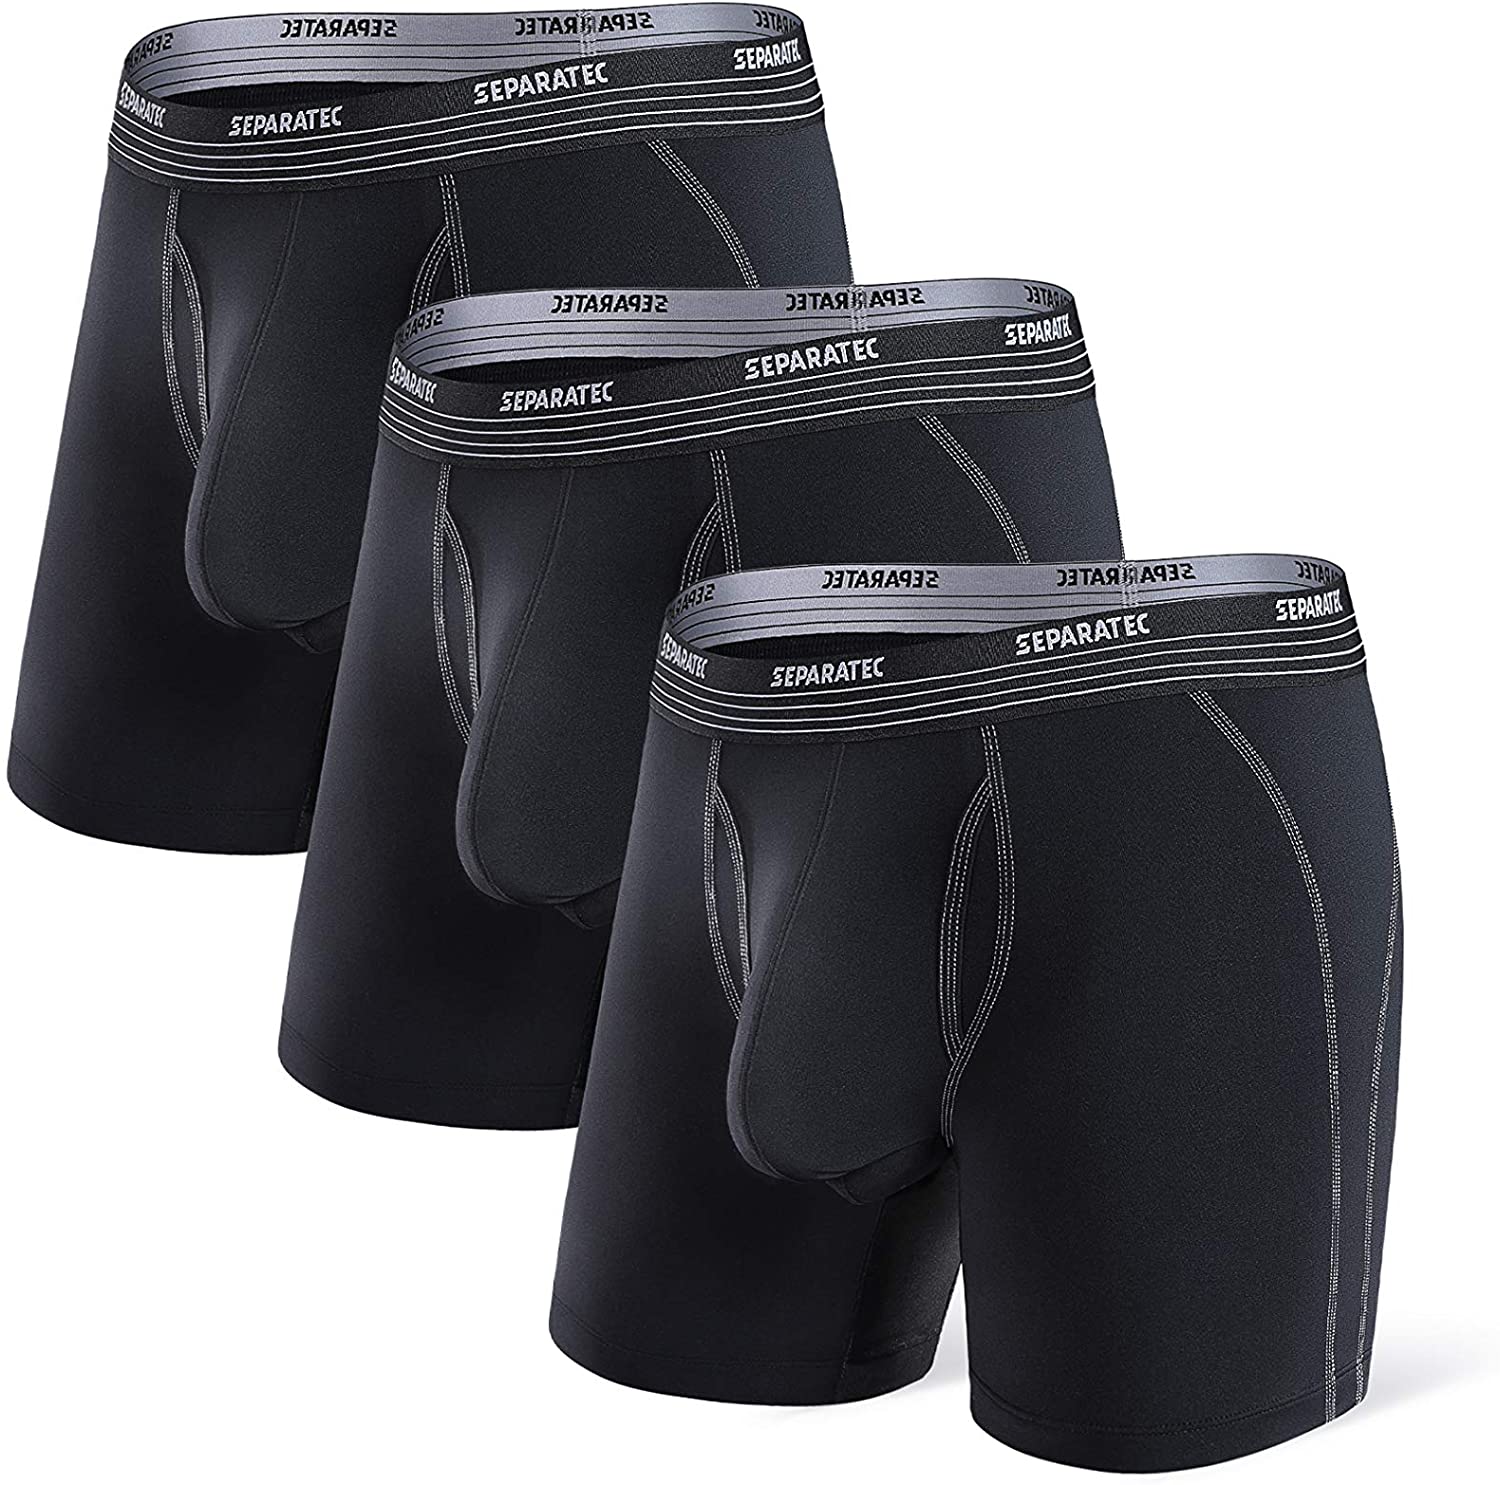 Buy Separatec Cotton Dual Pouch Mens Underwear Comfortable Soft Everyday  Boxer Briefs 7 Pack, Black - Everyday Underwear, Large at